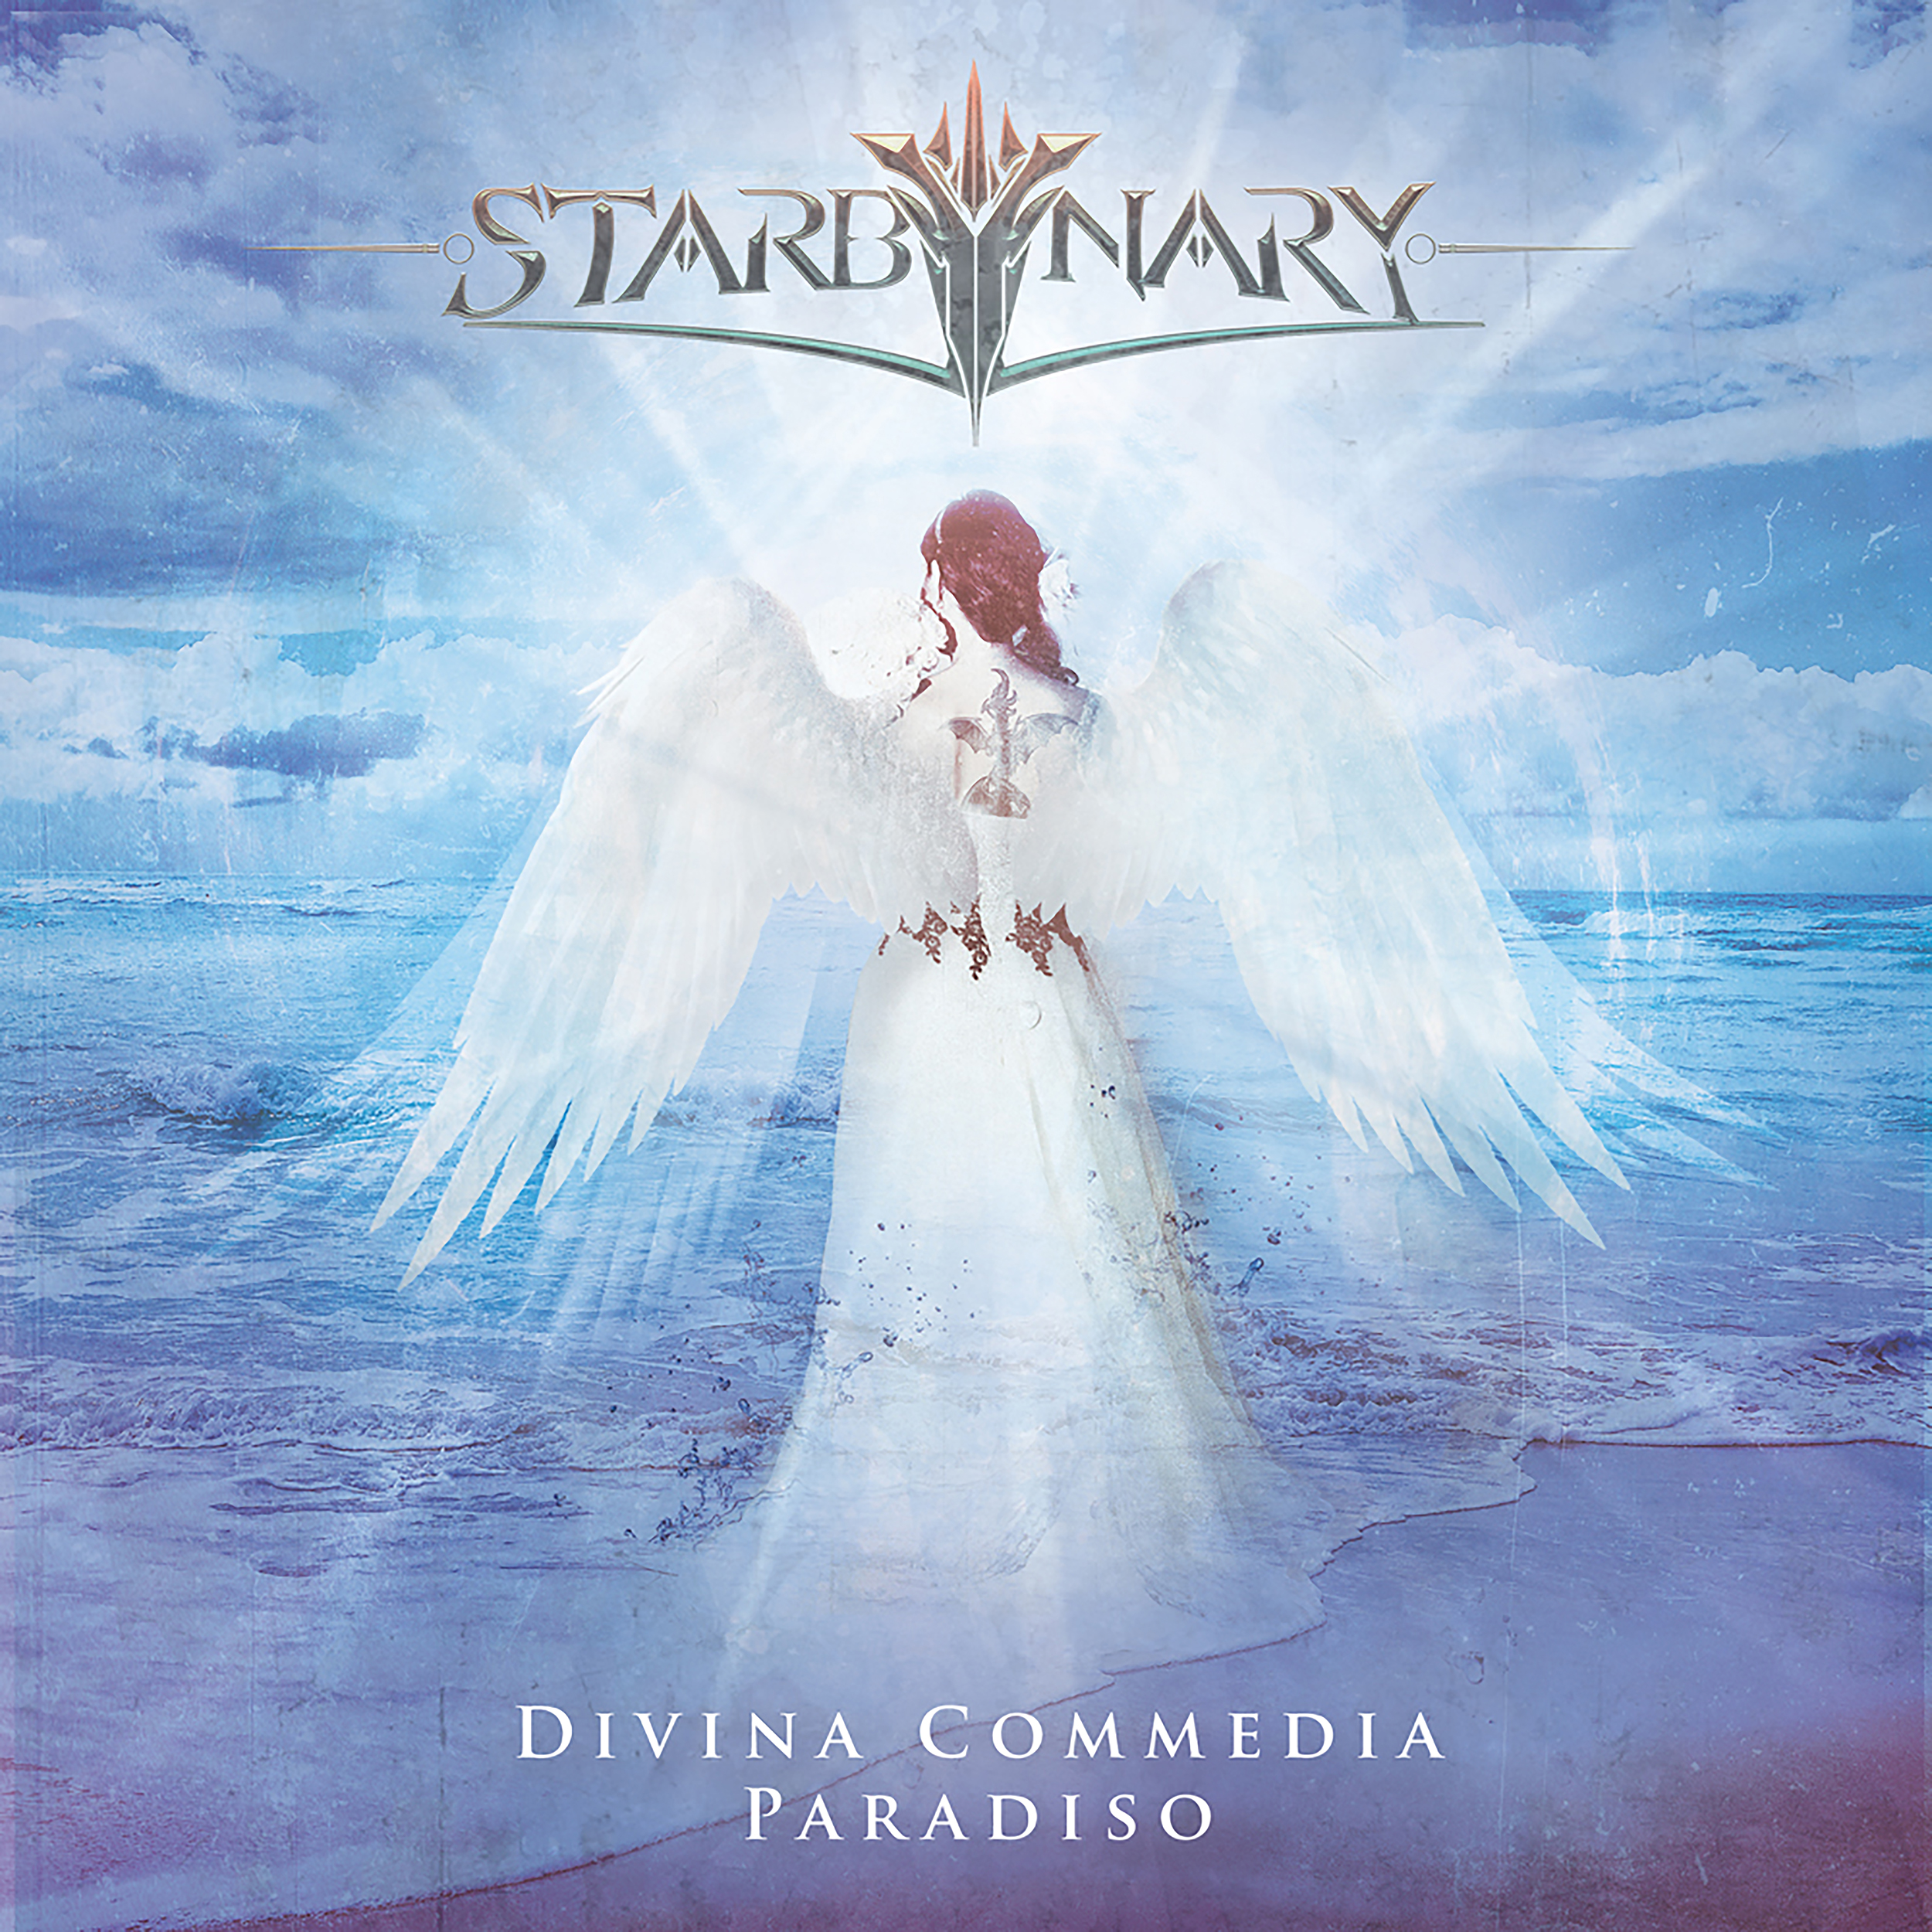 You are currently viewing Starbynary – Divina Commedia: Paradiso